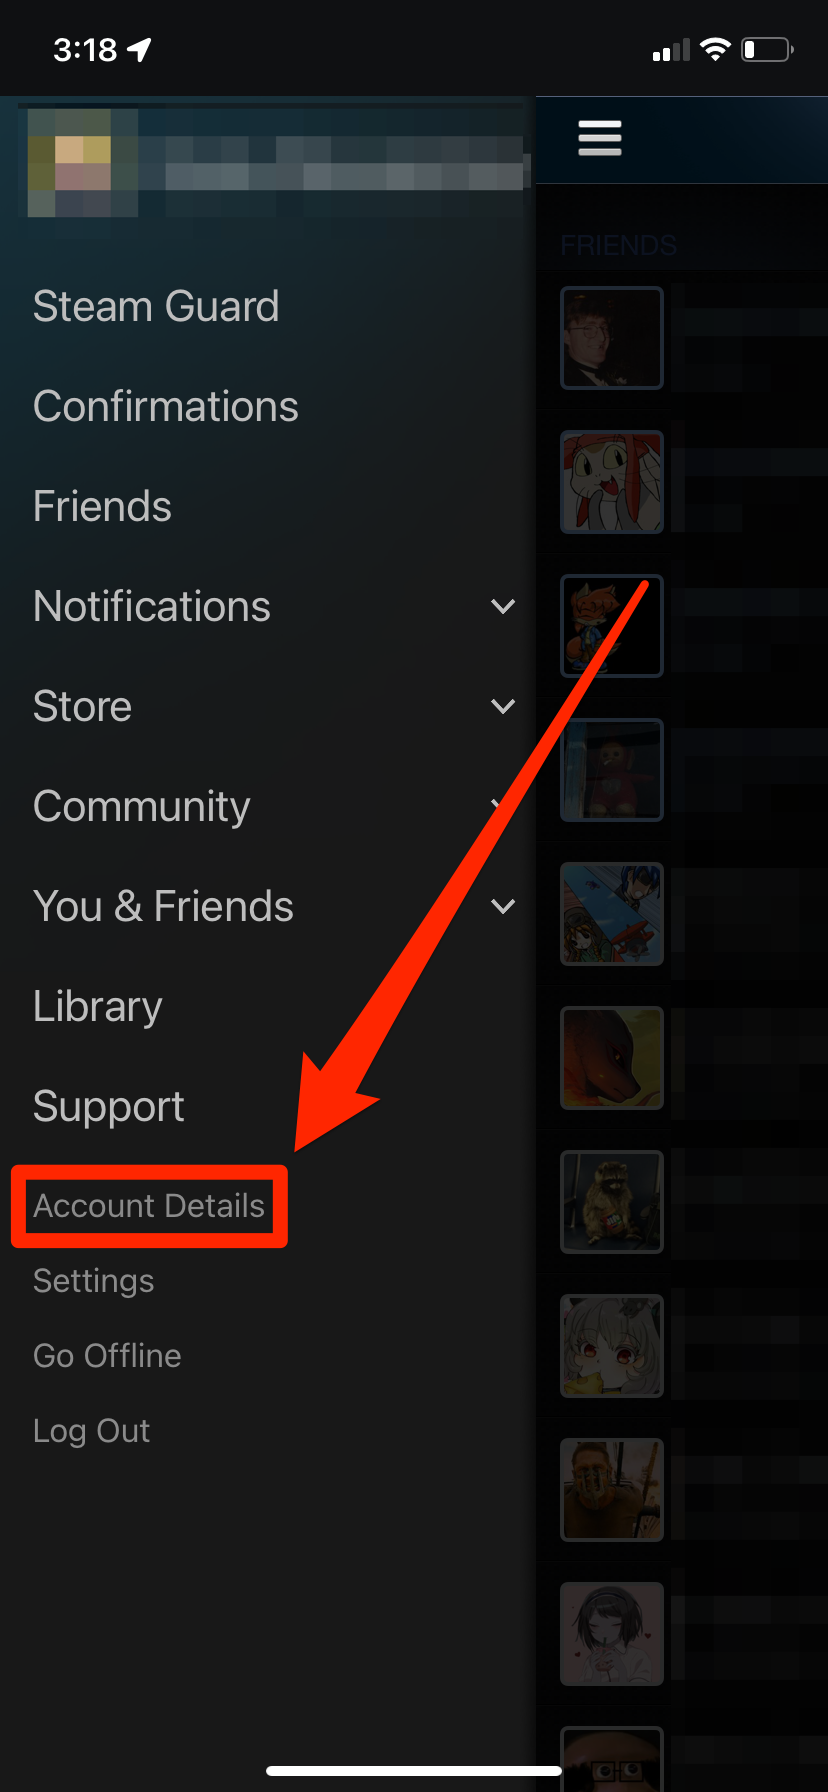 The sidebar menu in the Steam mobile app. The "Account Details" option is highlighted.